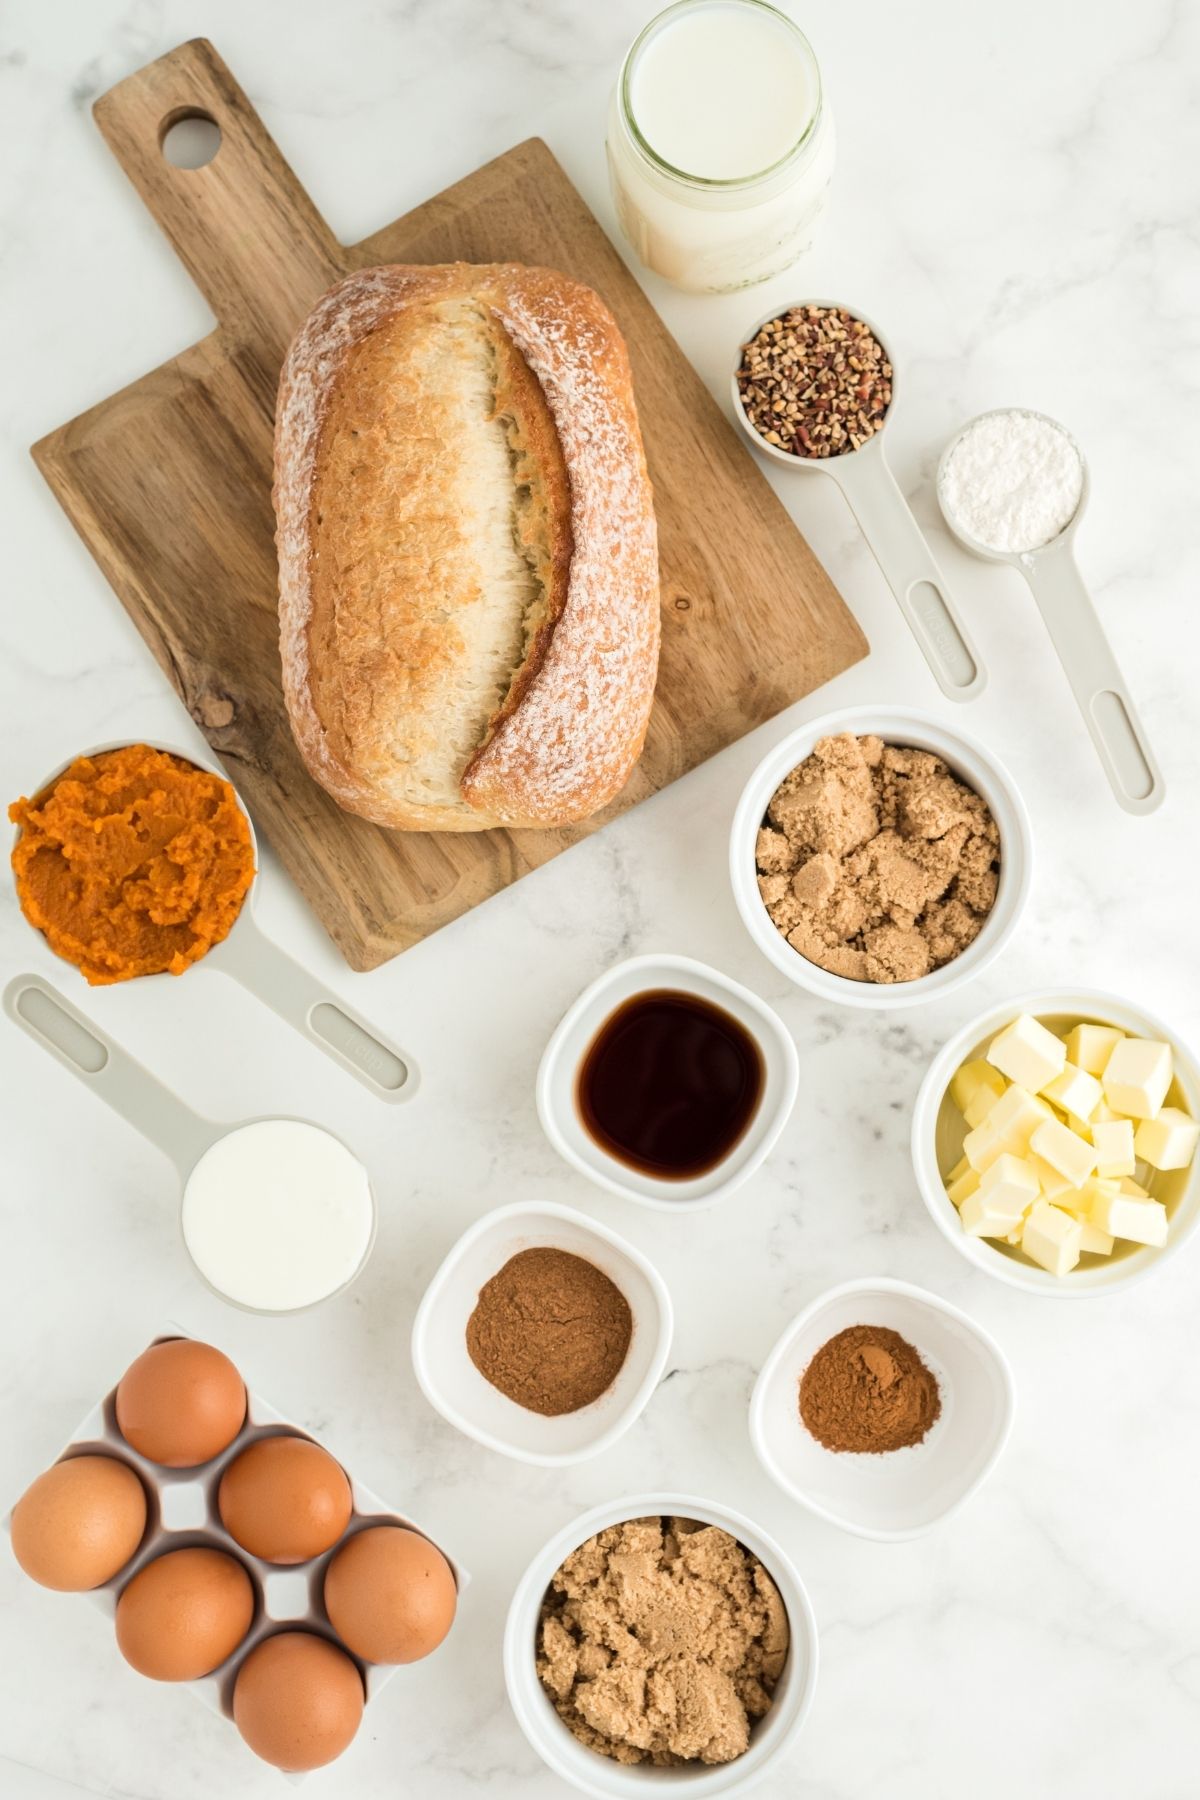 ingredients on white counter: loaf of crusty French bread, pumpkin puree, brown eggs, diced butter, vanilla, pumpkin pie spice, heavy cream, and milk